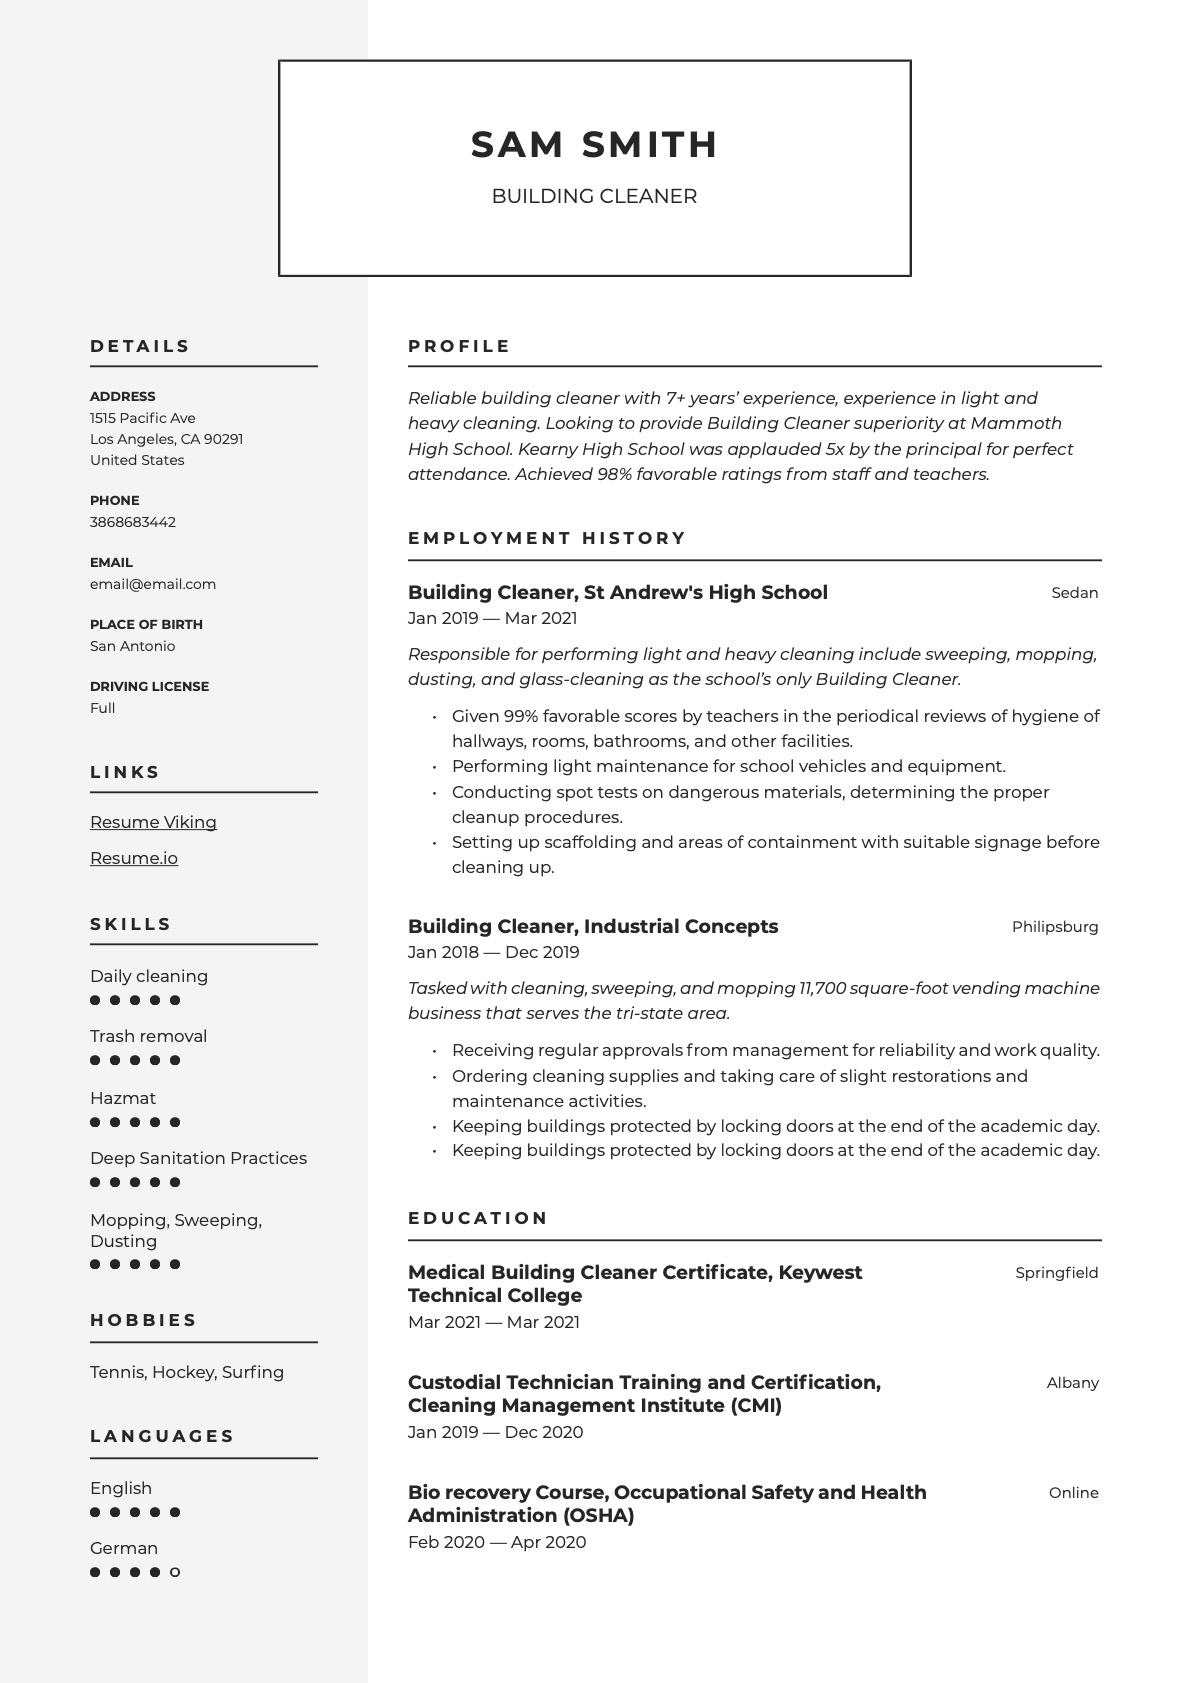 Example Resume Building Cleaner-8